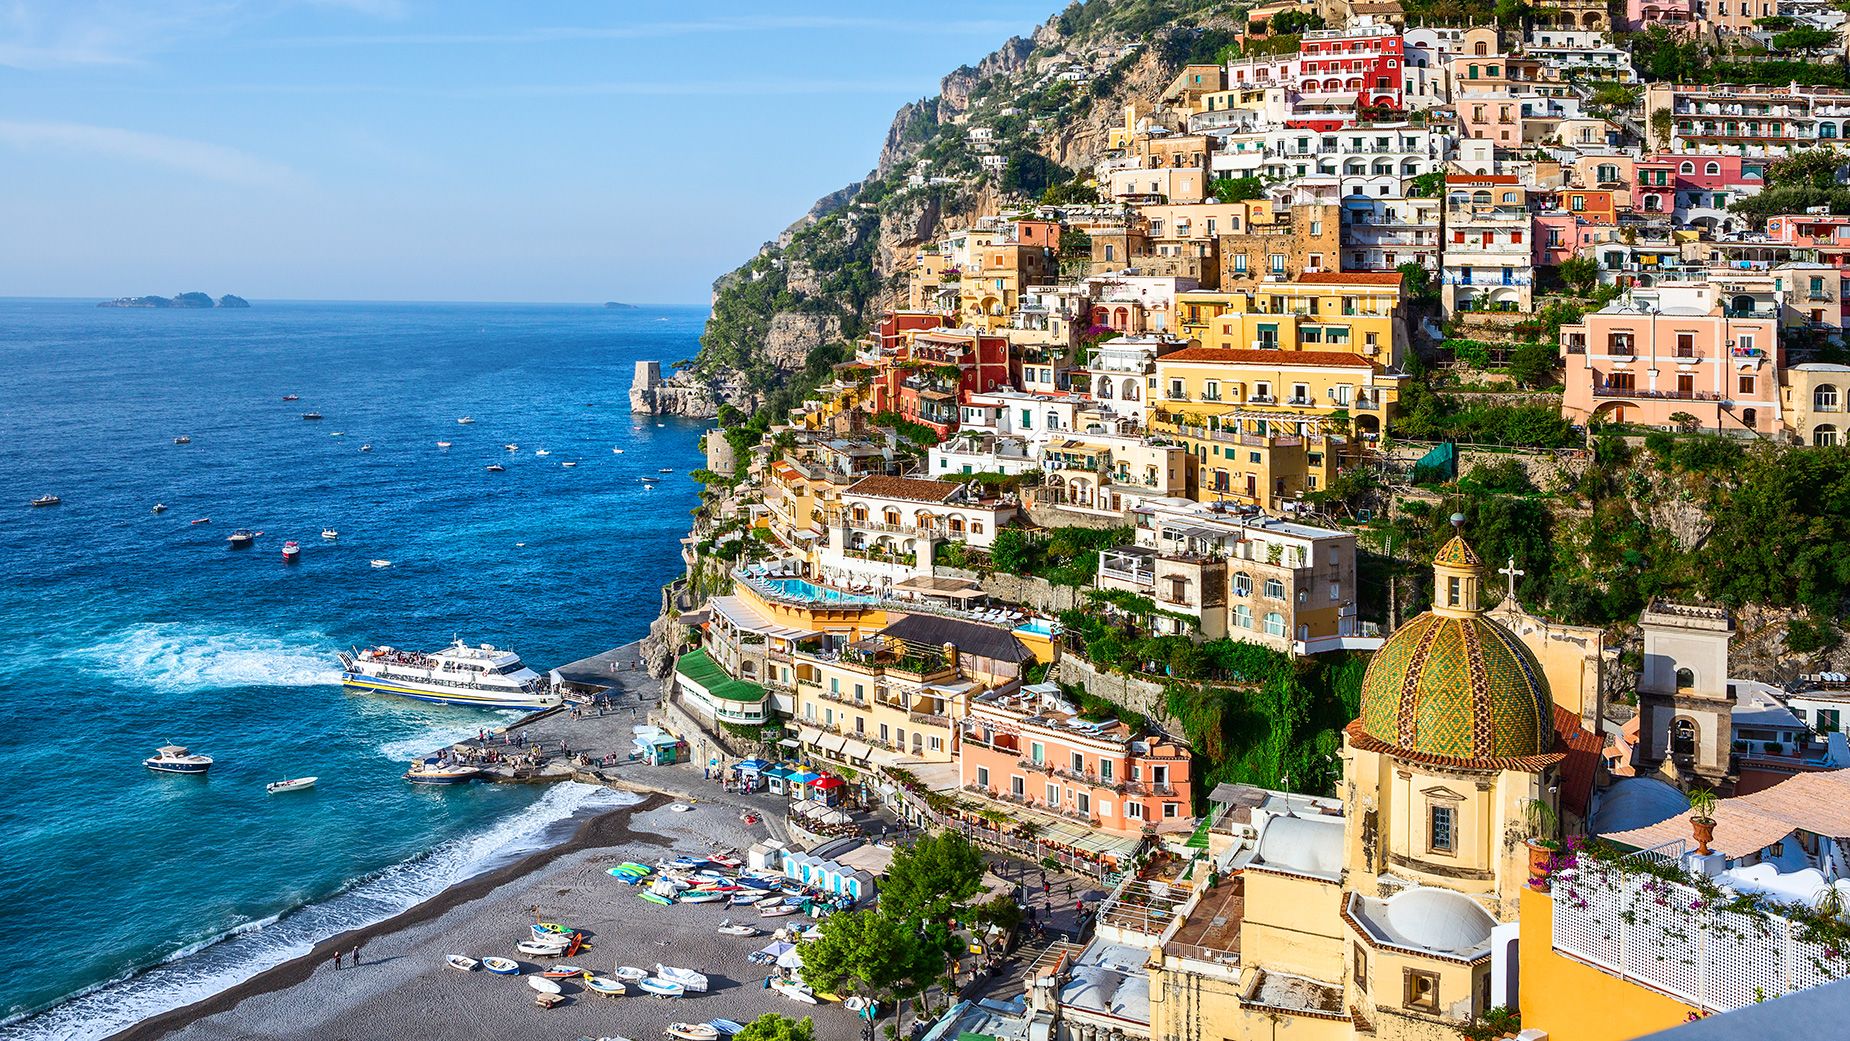 Italy is a popular destination for people hoping to move abroad. This is a scenic view of Positano on the Amalfi Coast. But would this spot make a good home?